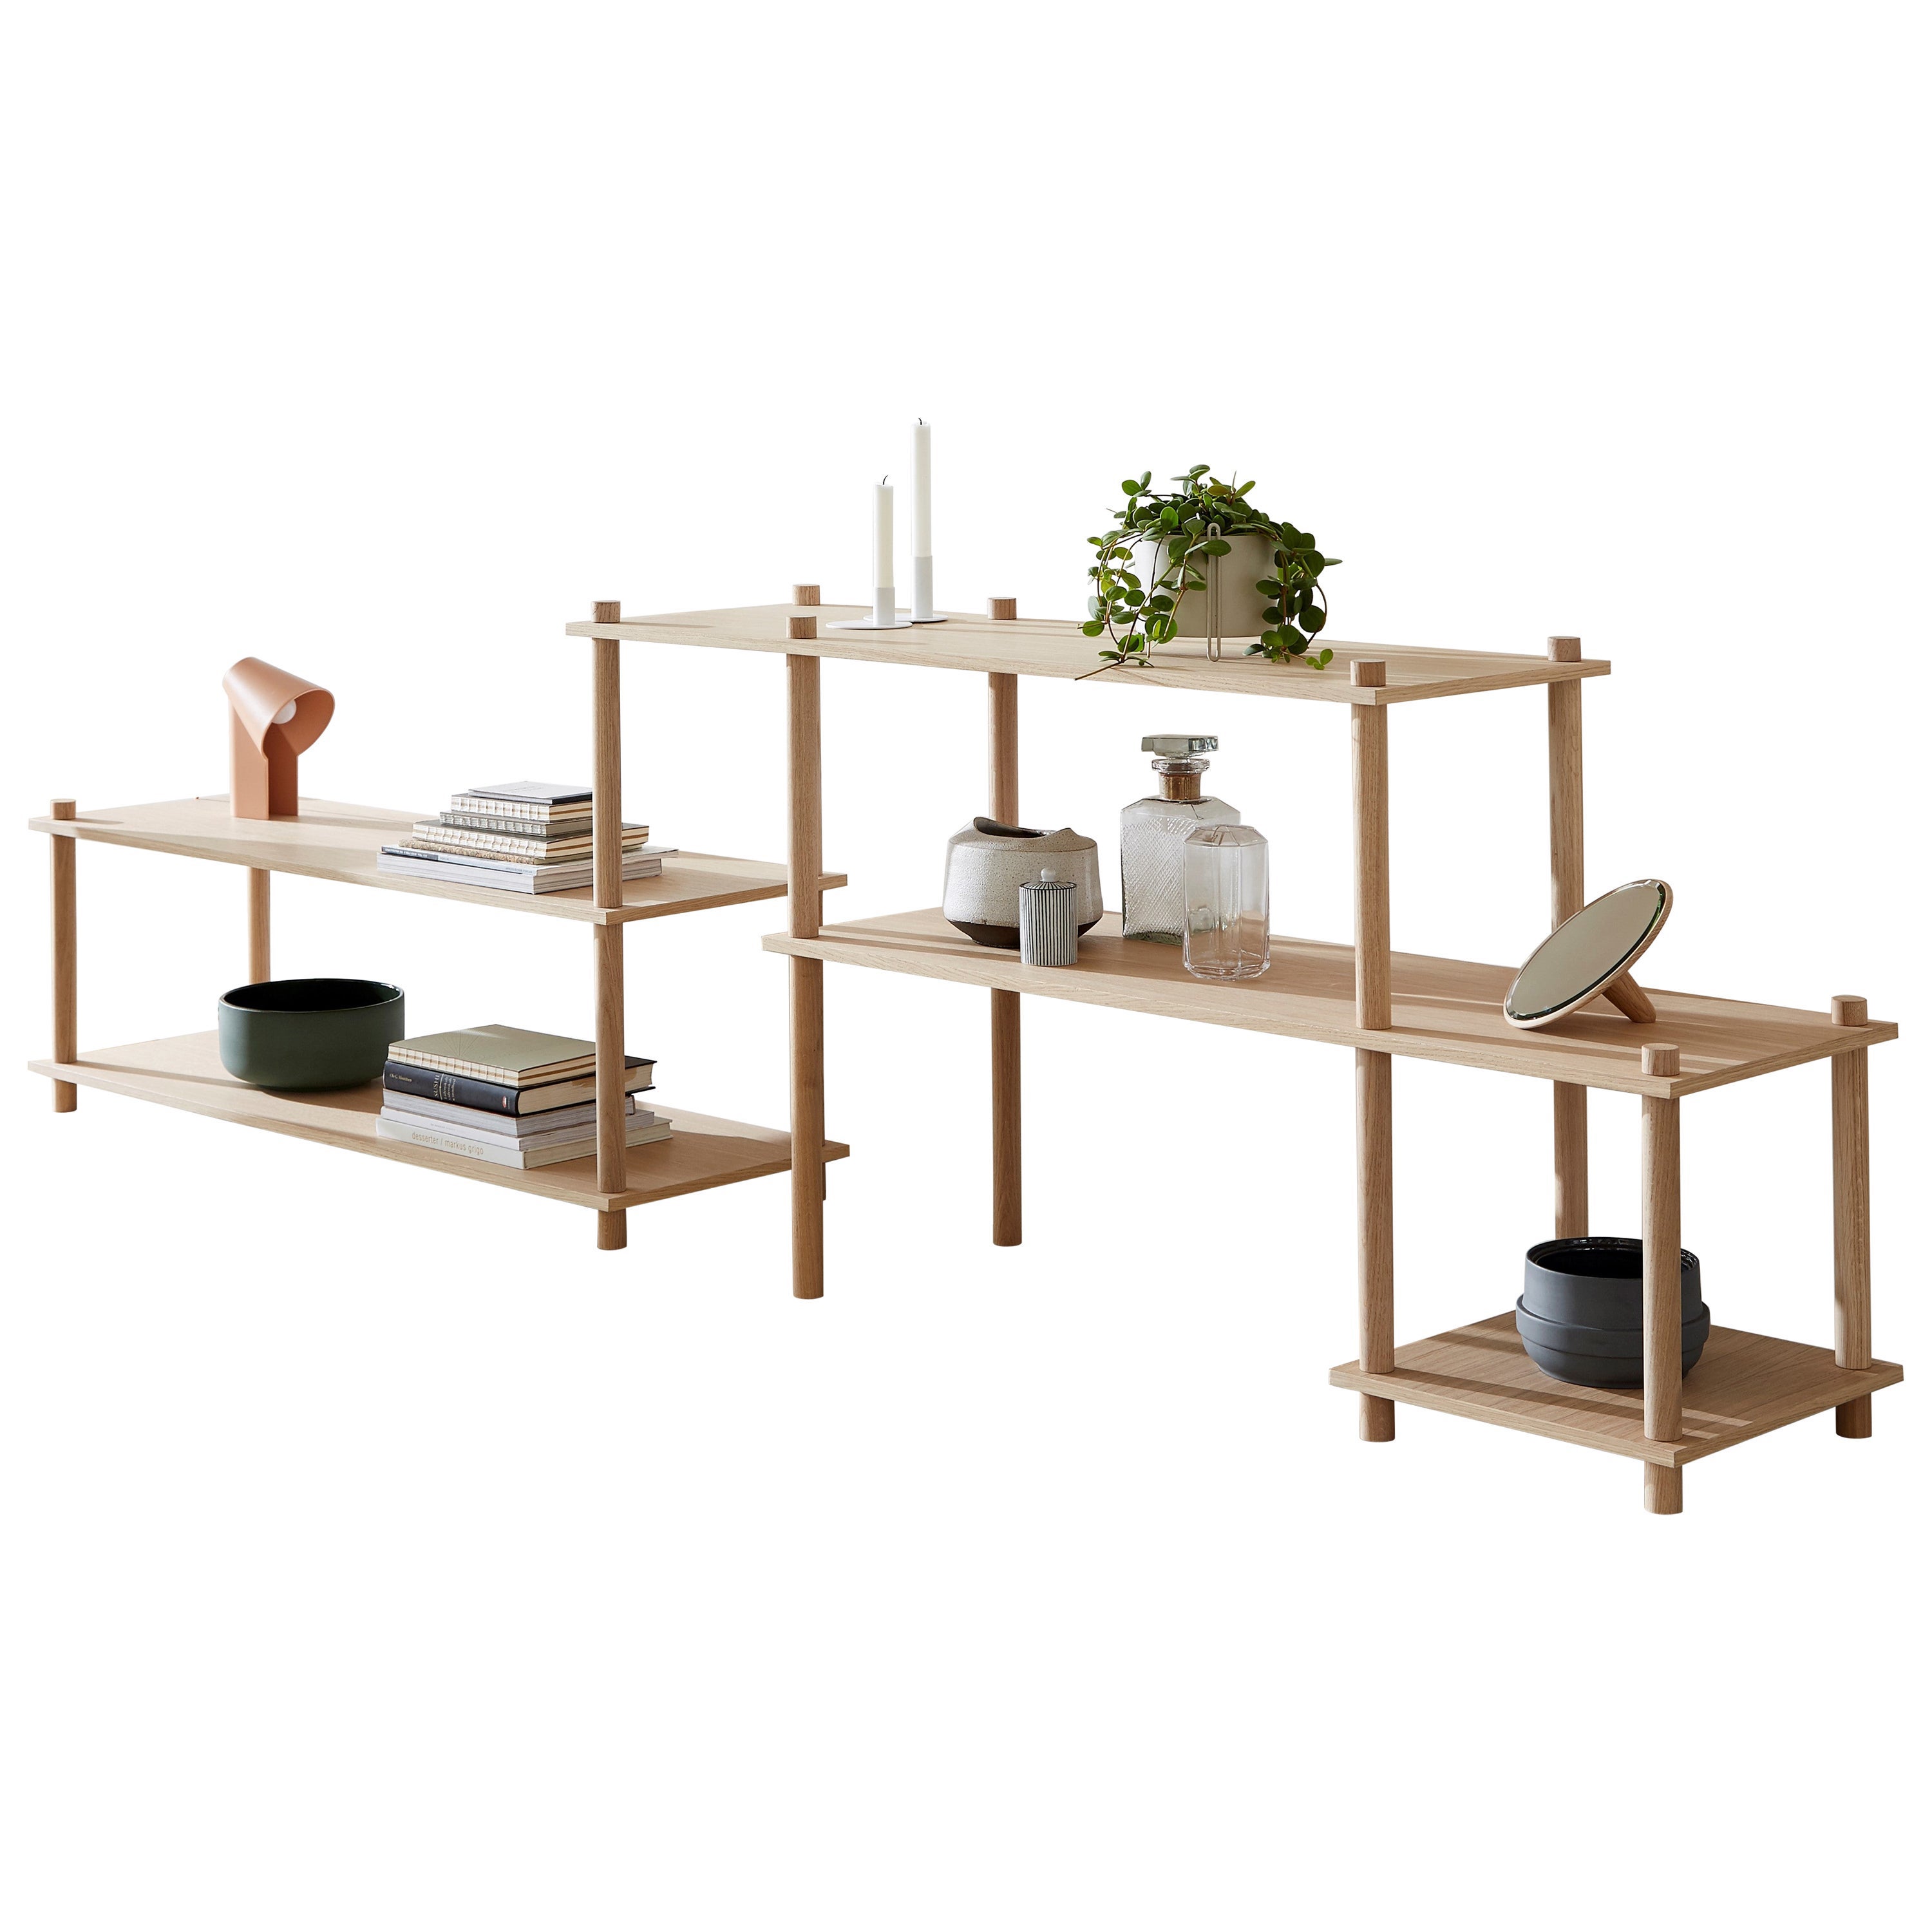 Oak Elevate Shelving viii by Camilla Akersveen and Christopher Konings For Sale